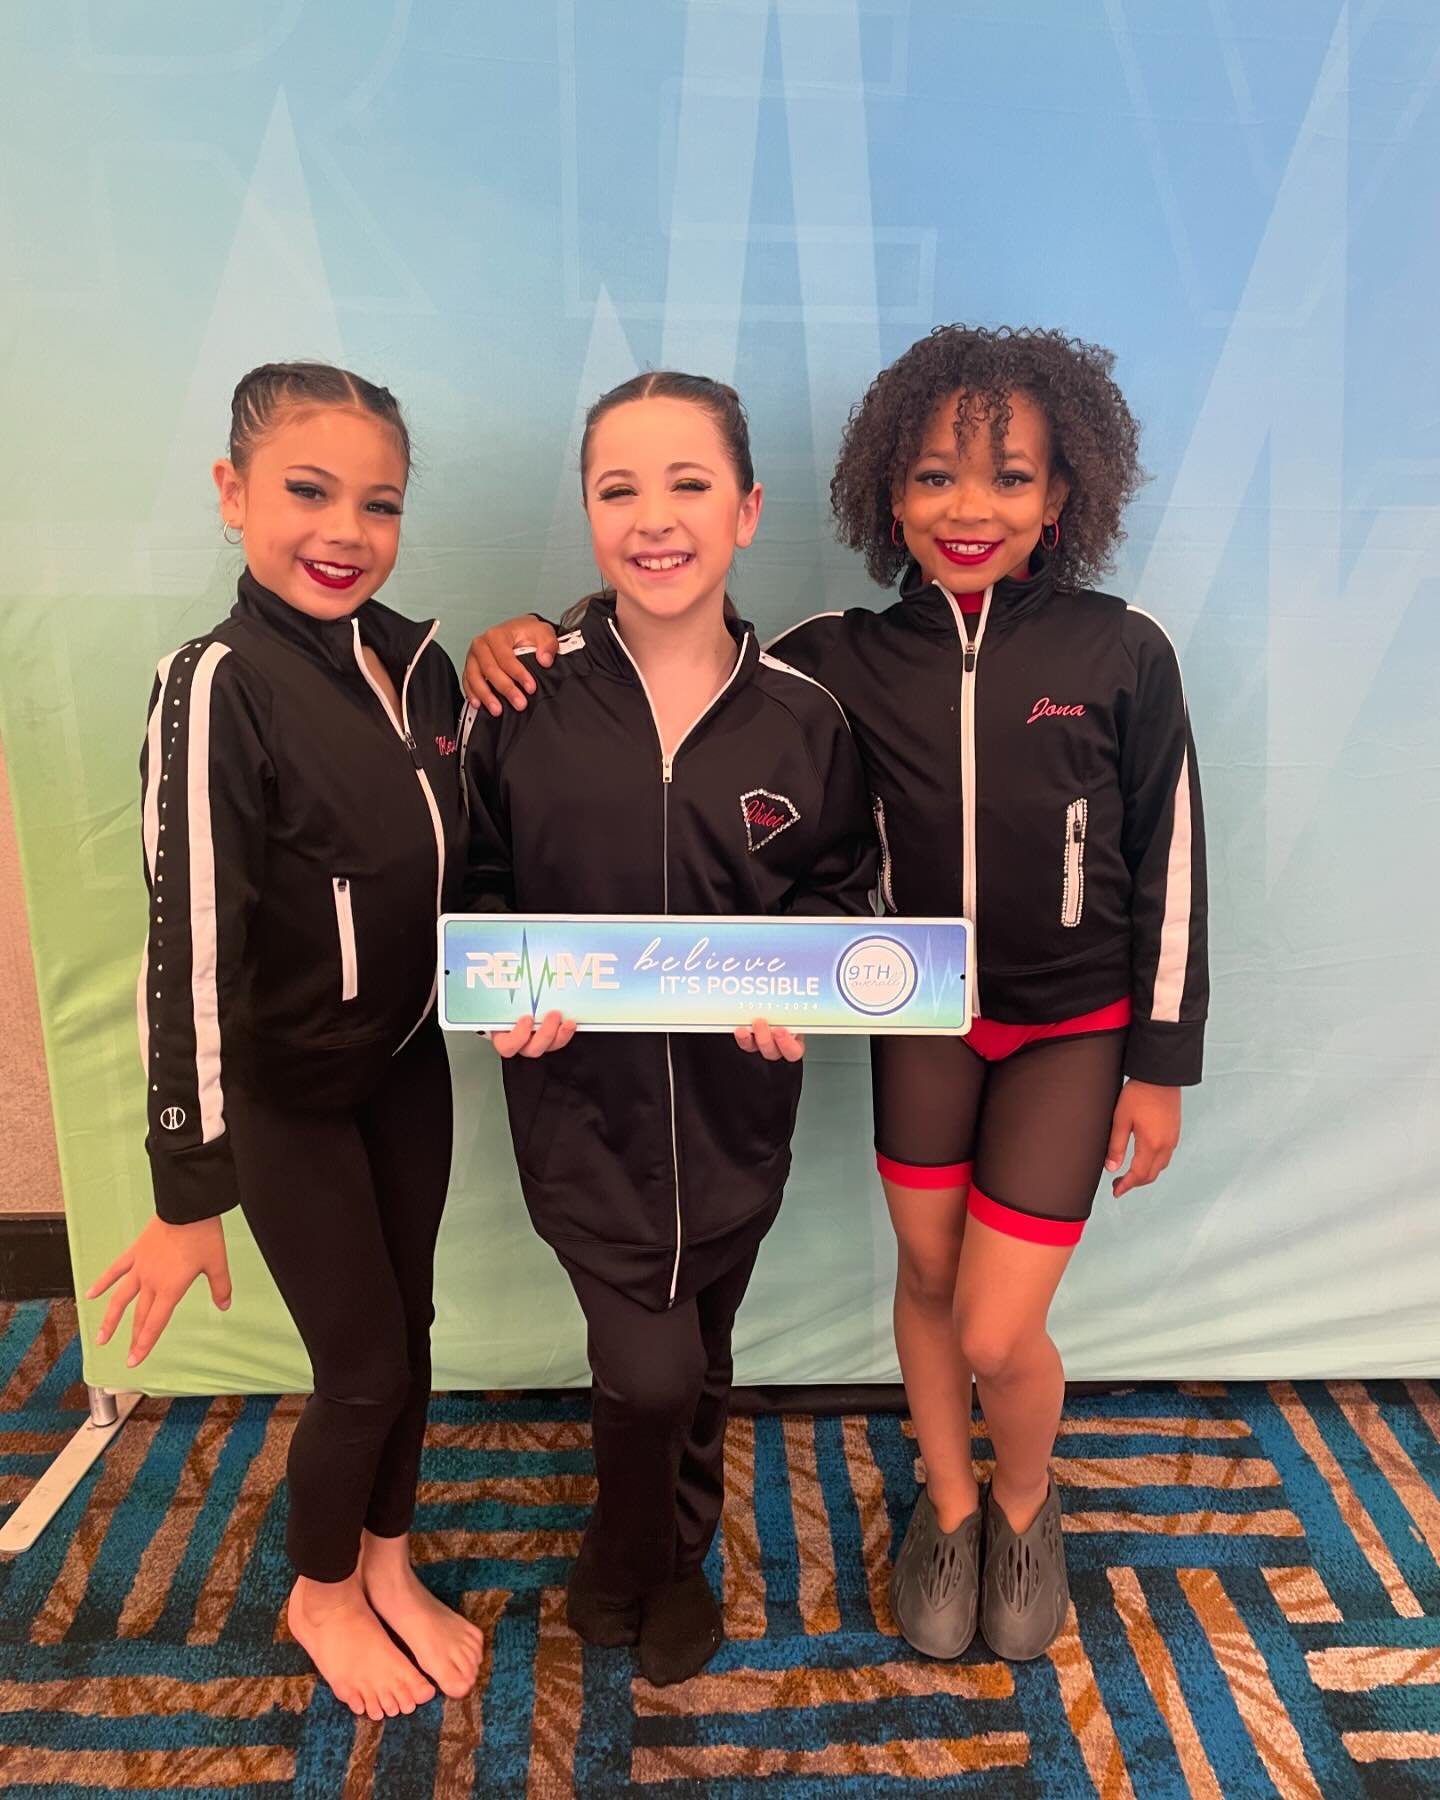 All smiles here on DAY 2 @revive_dance_convention 🪩 These dancers are feeling SO inspired by the classes &amp; talent here this weekend!🩷 We&rsquo;re so proud of their hard work so far! 

#season13 #diamonddancers #dancetechnique #lyricaldance #con